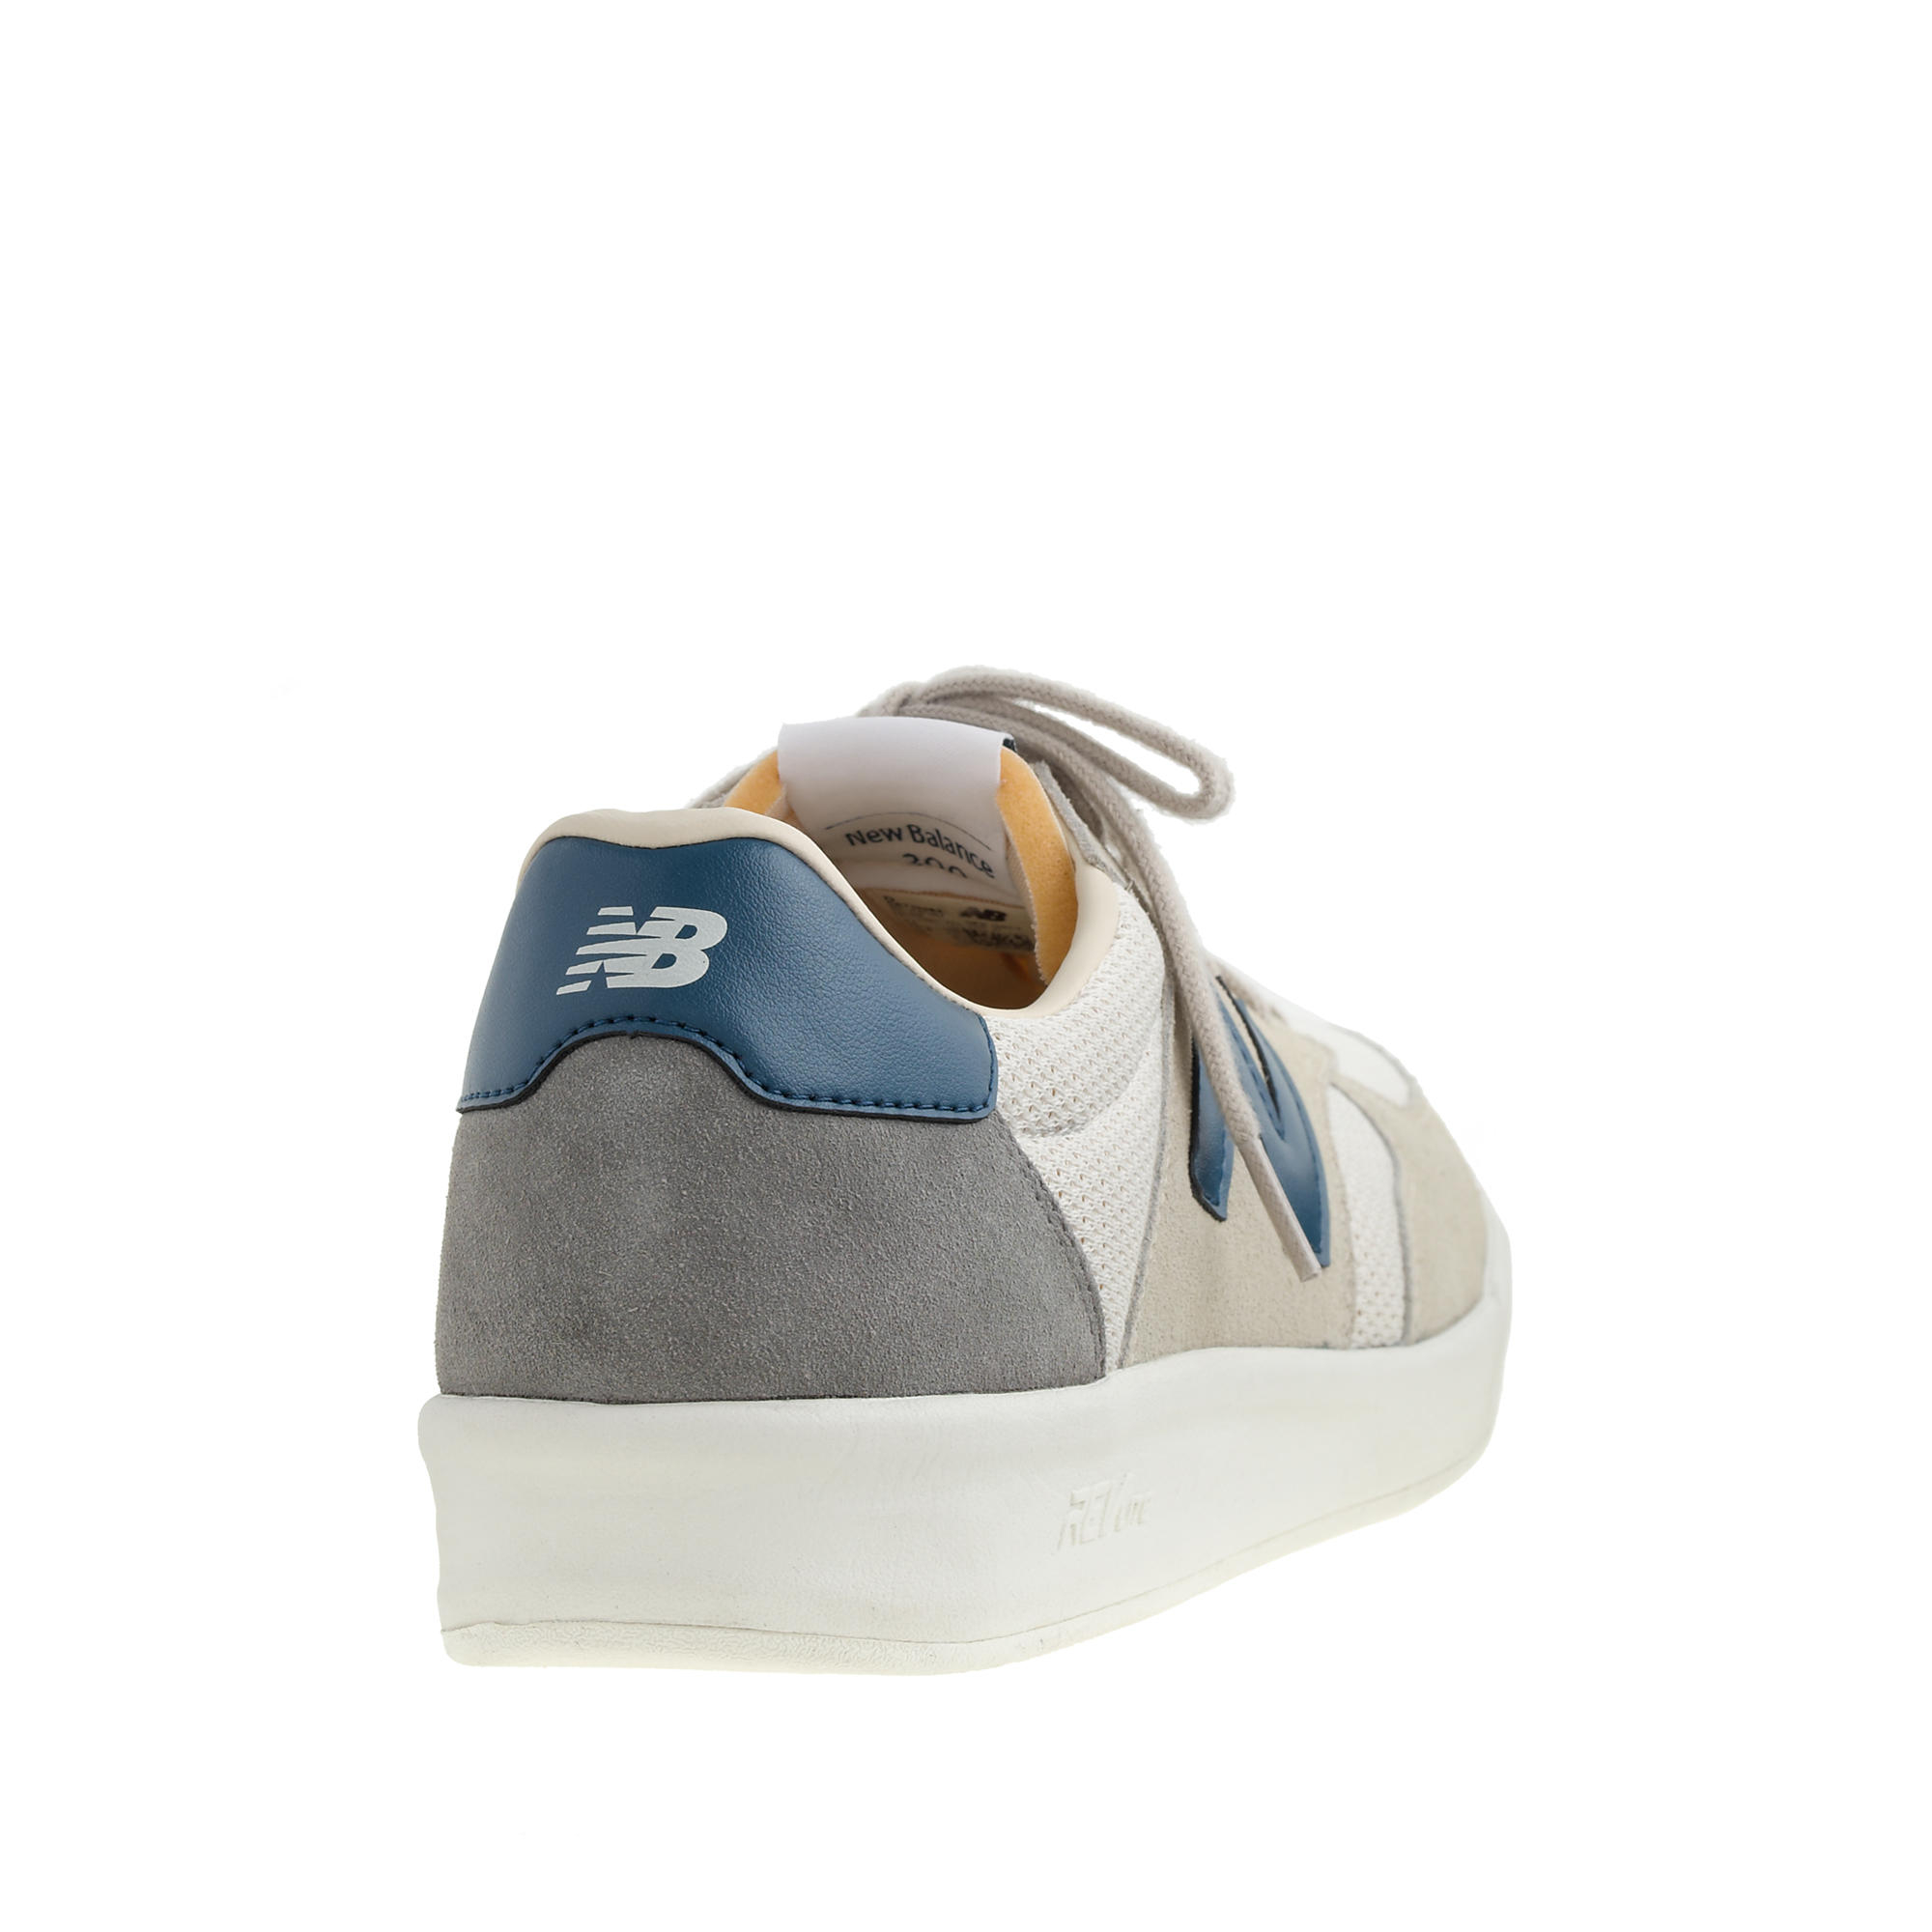 J.Crew New Balance Crt300 Sneakers in Natural for Men | Lyst